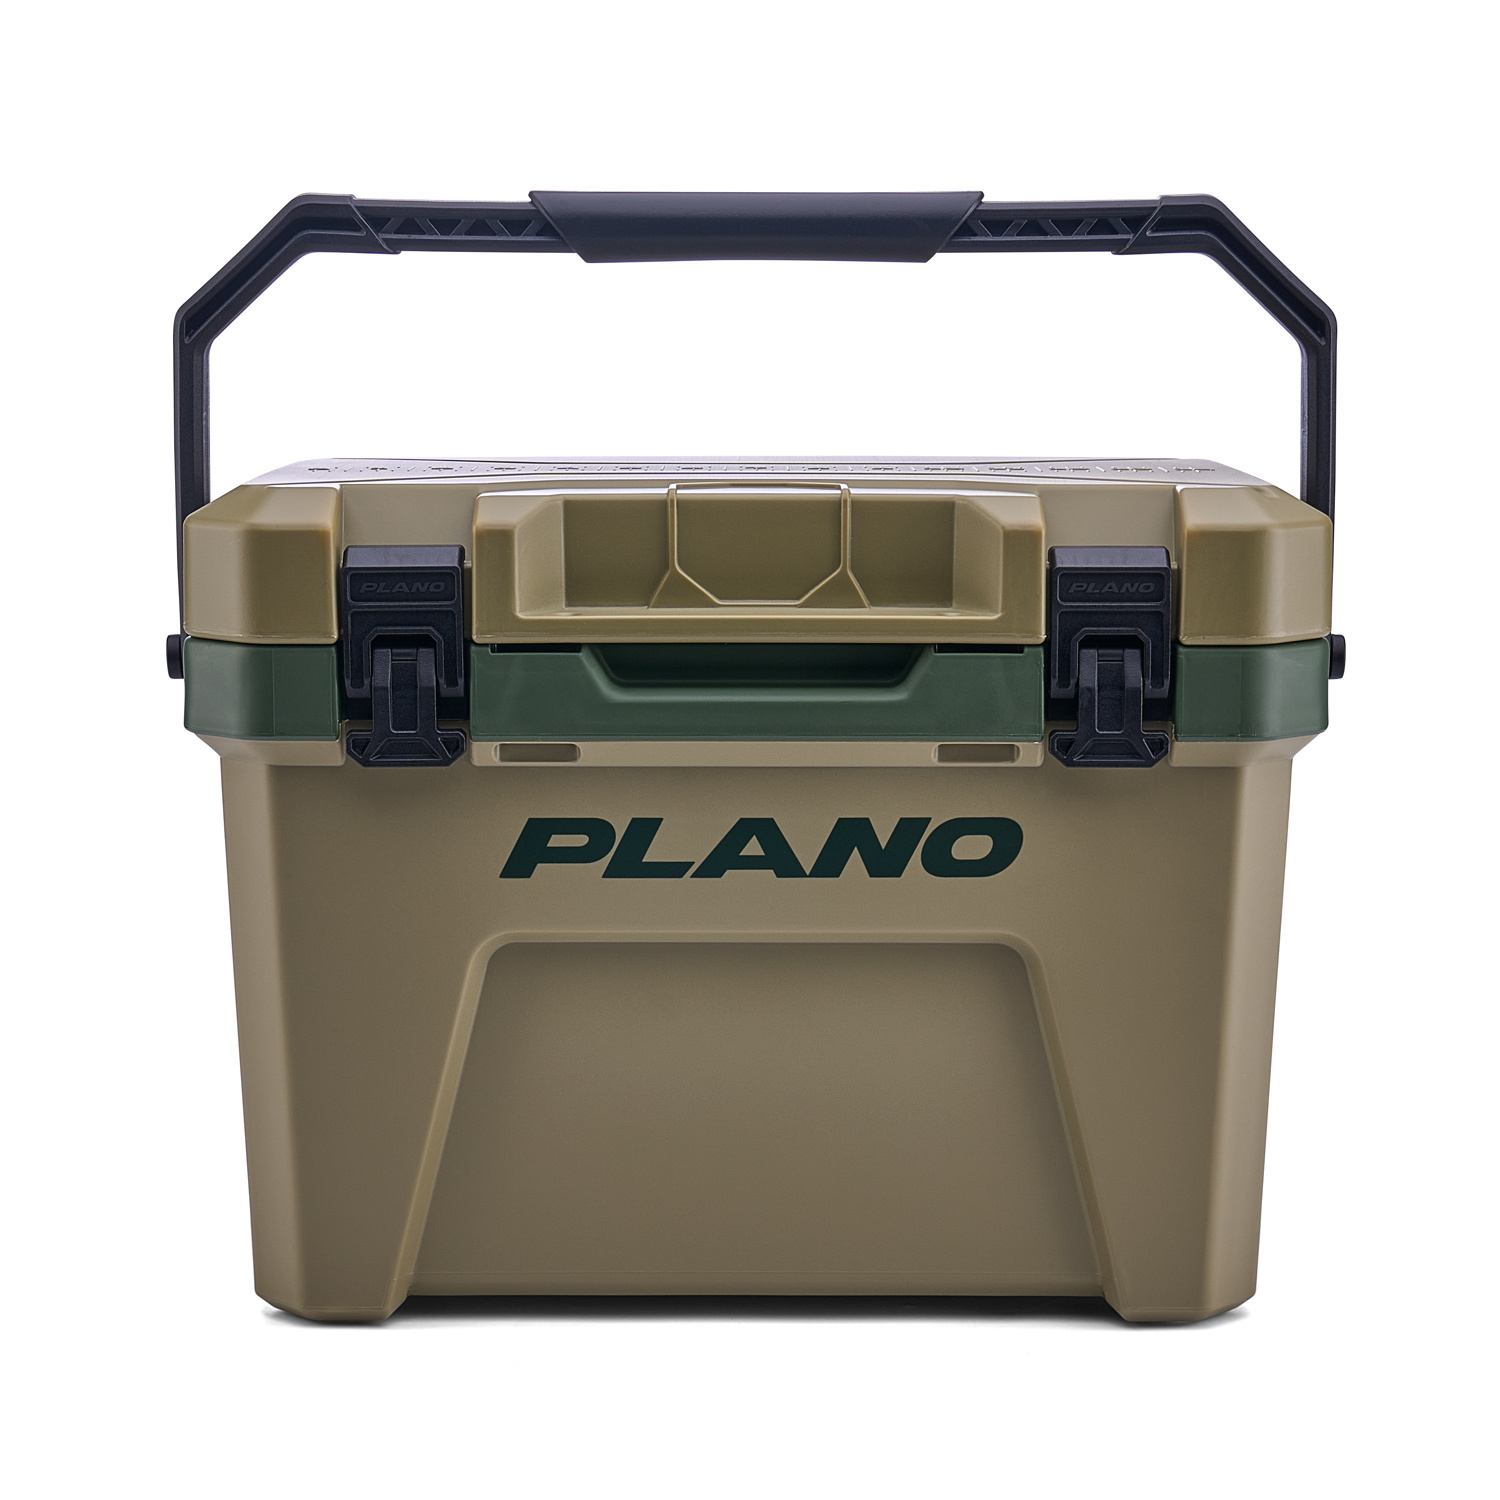 Plano Frost Cooler 13L Green